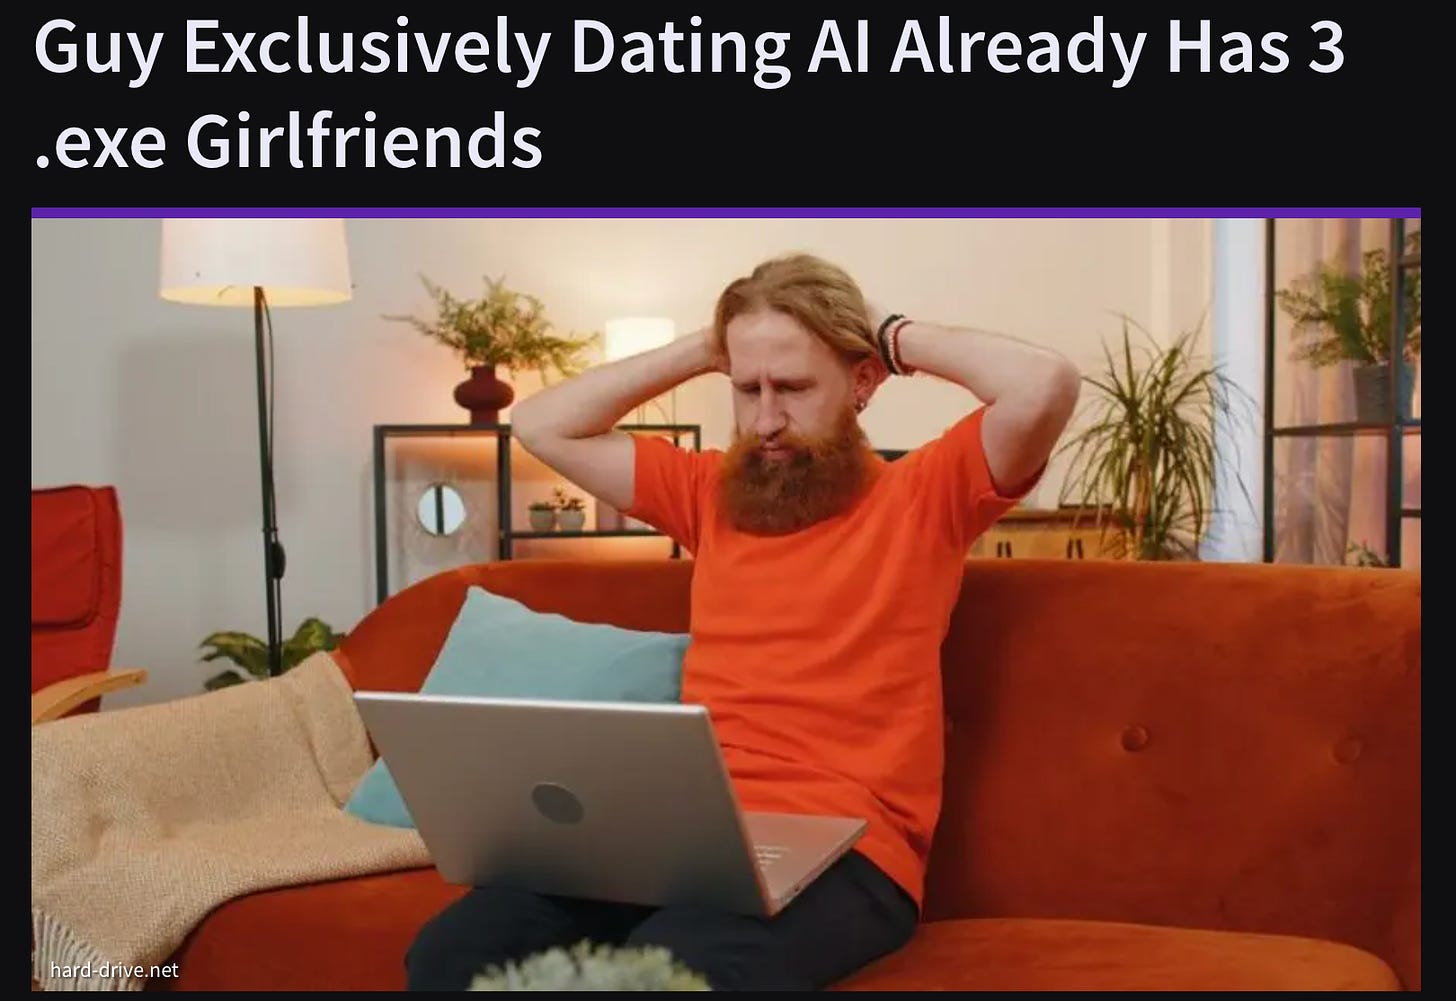 Headline and image of a guy in an orange shirt looking at his computer, overwhelmed.